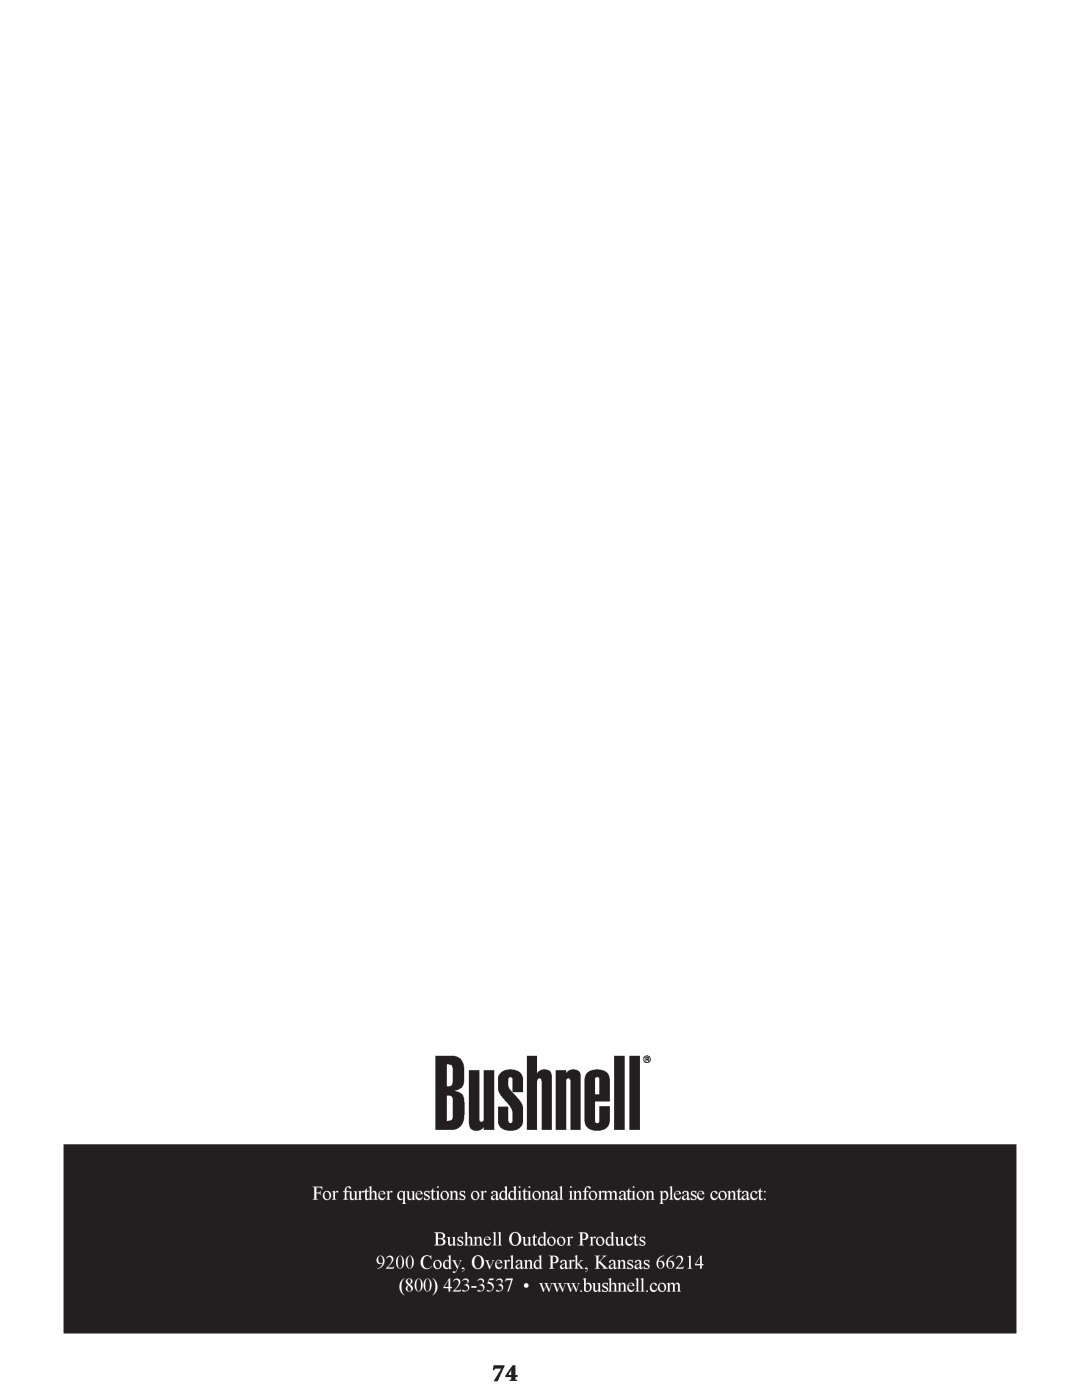 Bushnell 78-9970, 78-9945, 78-9930 instruction manual Bushnell Outdoor Products, Cody, Overland Park, Kansas 